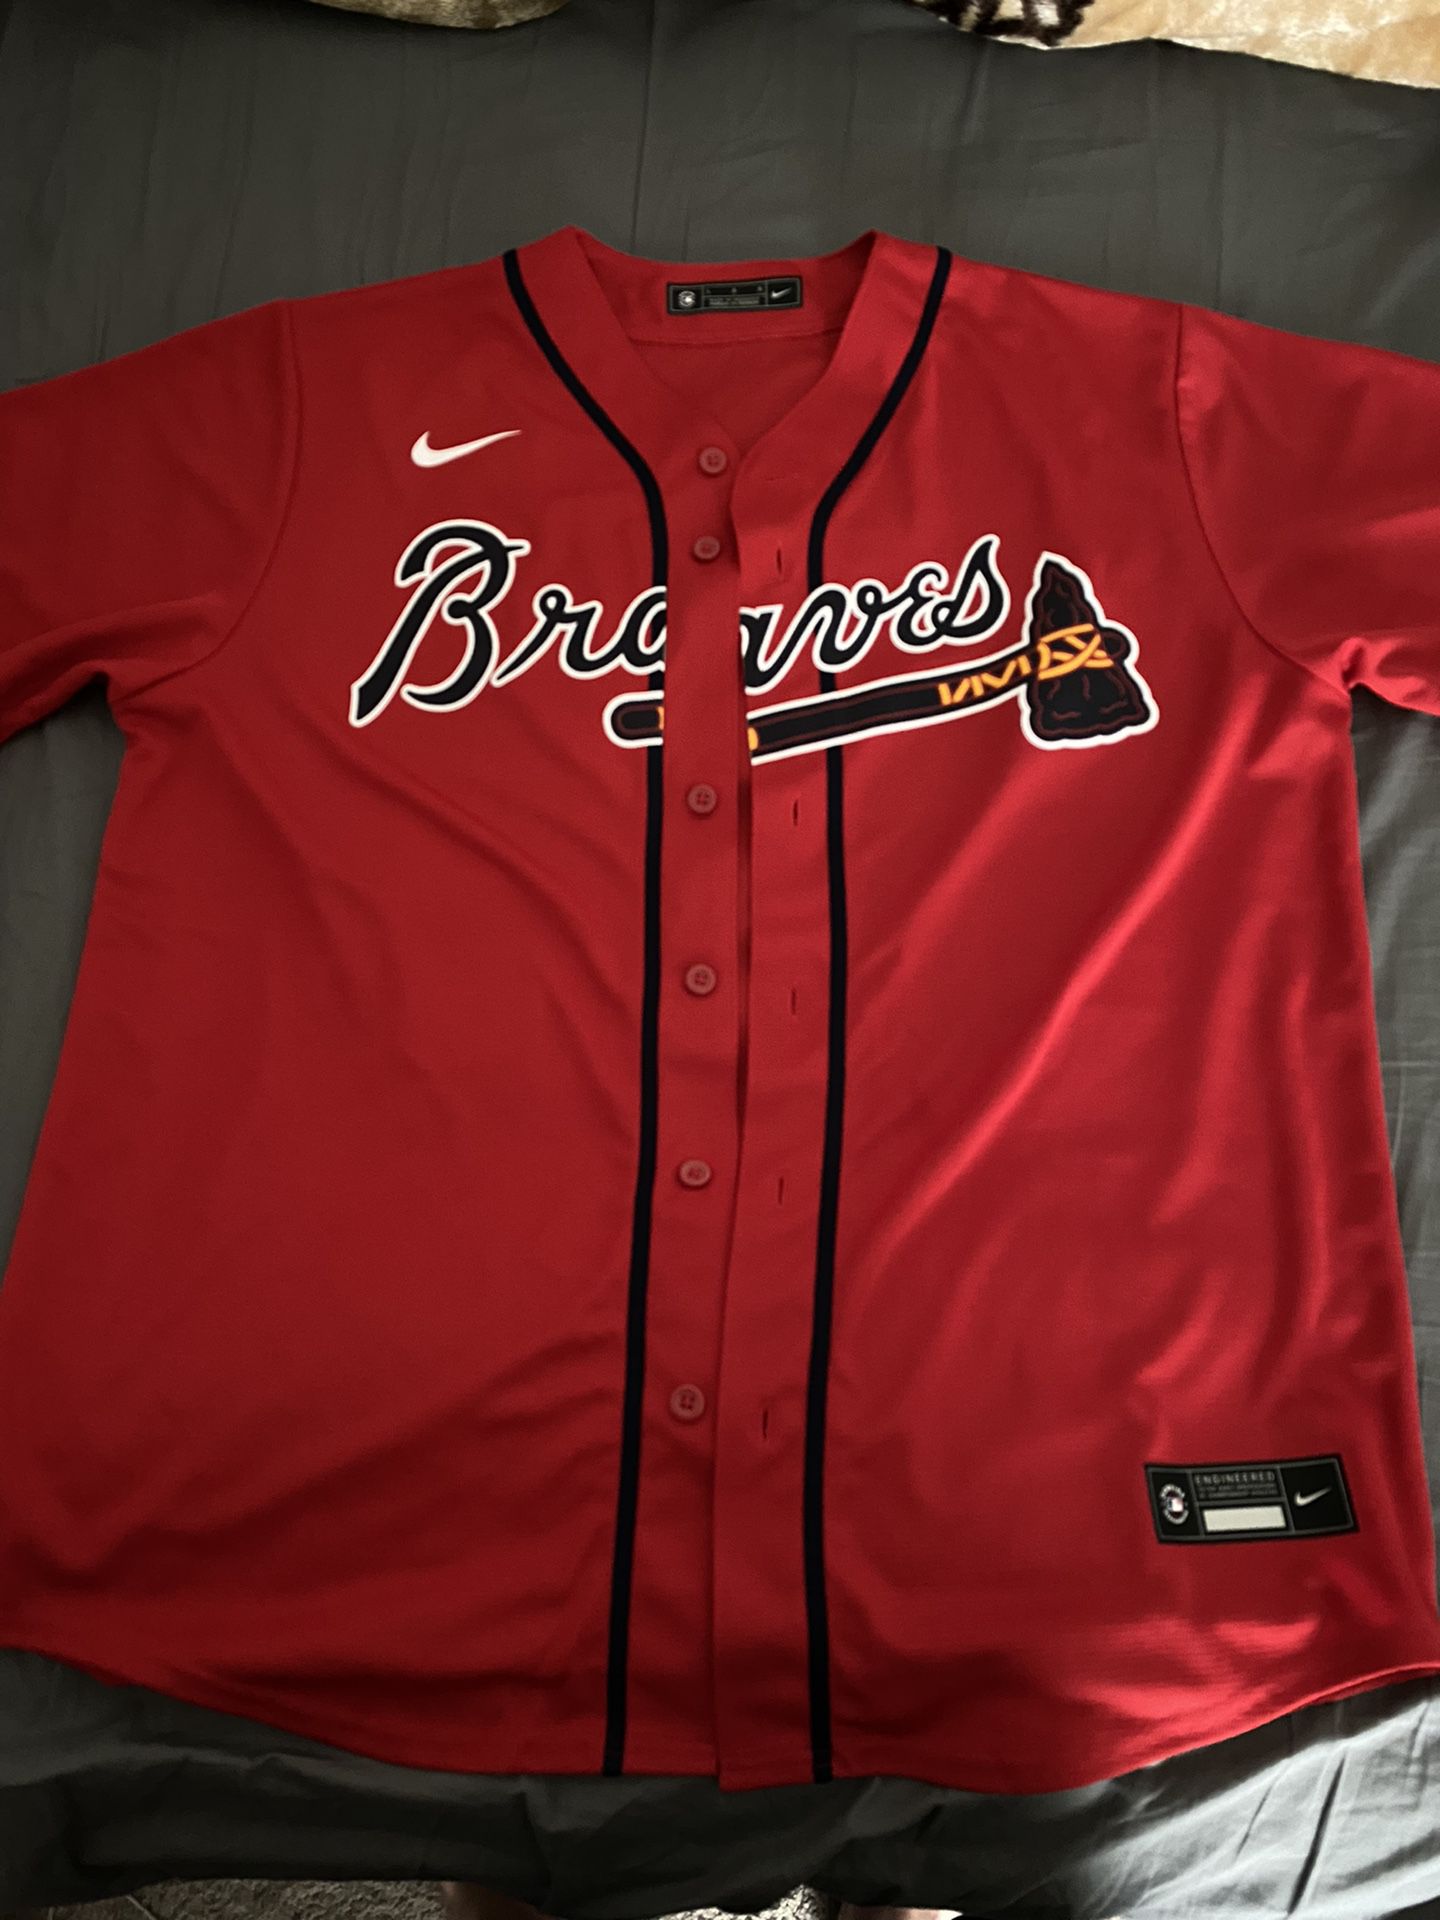 Atlanta Braves Jersey for Sale in Athens, GA - OfferUp